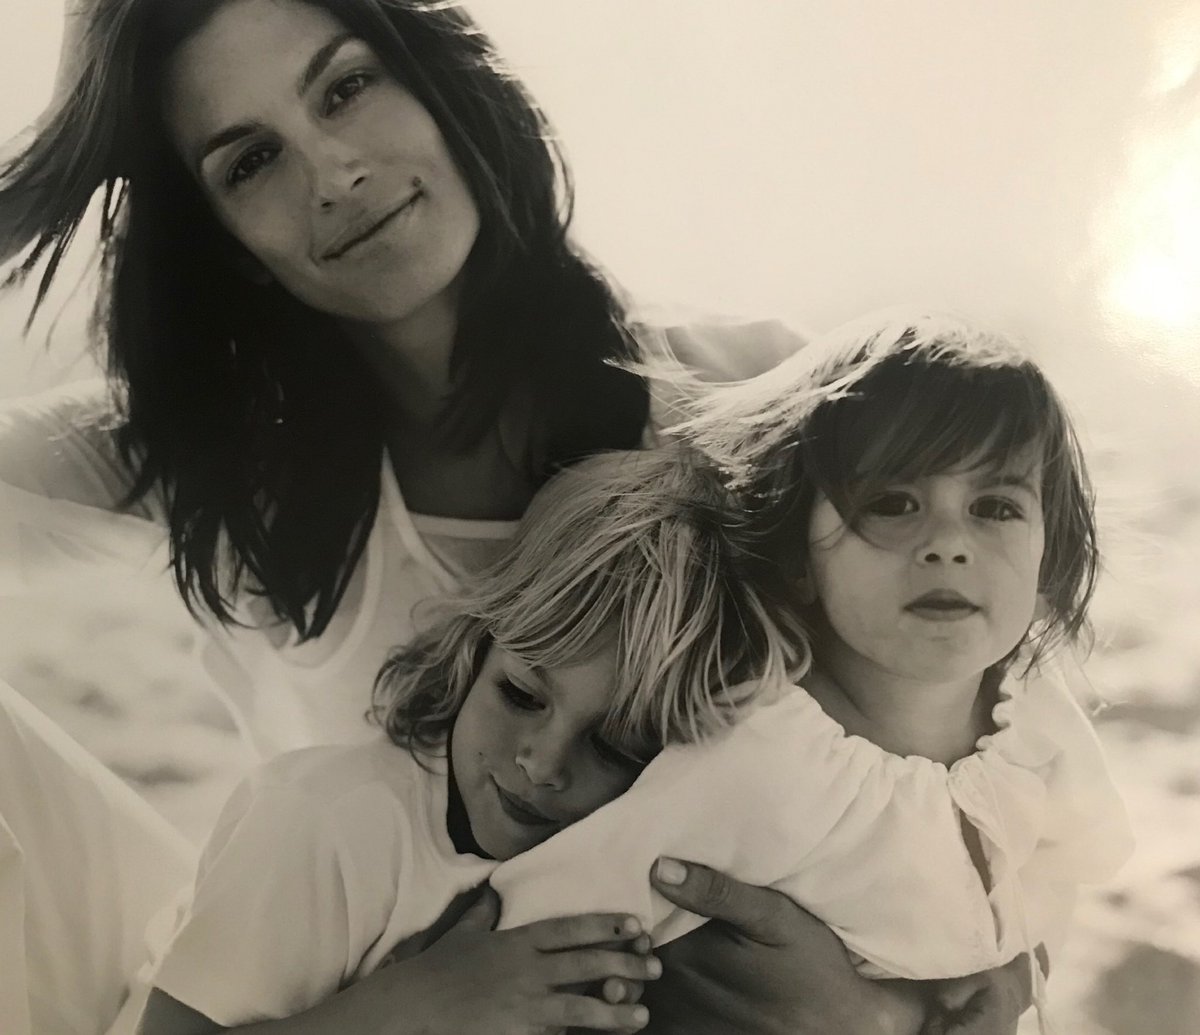 I love you both so so much. I’m so proud to be your mom and humbled by the lessons you continue to teach me. https://t.co/pZPC4f38Ie